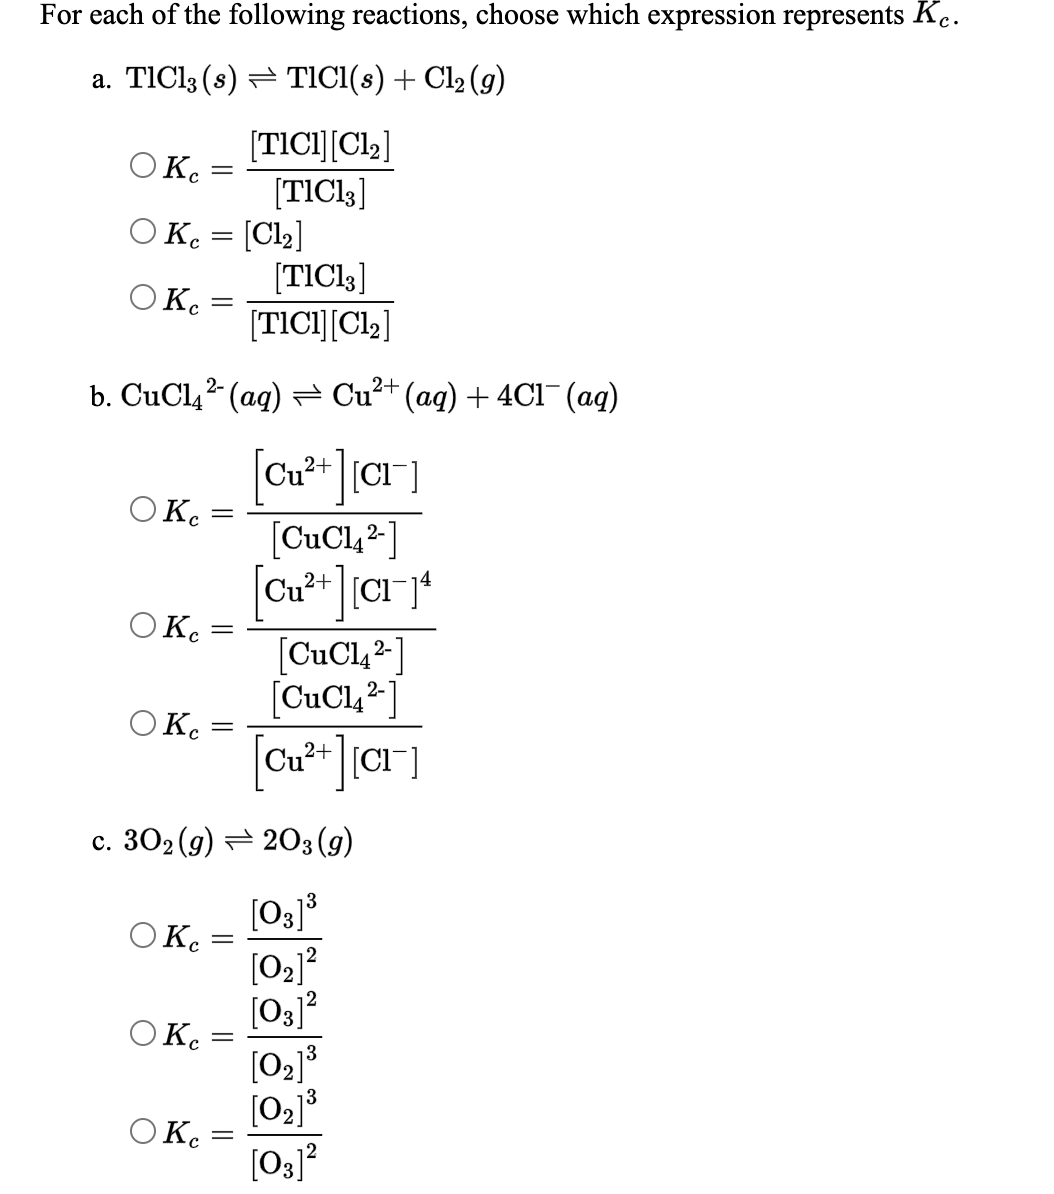 For each of the following reactions, choose which expression represents K.
a. TIC13 (s) = TICI(s) + Cl2 (g)
[TICI][Cl2]
O K.
[TICI3]
O K. = [Cl2]
[TICI,]
OK.
[TICI][Cl2]
b. CuCl,2 (ag) = Cu²+ (aq) + 4C1¯(ag)
2+
Cu?
O K.
[CuCl,2-]
OK.
[CuCl,2]
[CuCl,² ]
Ο Κ.
[CuCl, 2-
c. 302 (g) = 203 (g)
[O3]³
O Ke
[02]?
[03]?
O K :
[02]3
[03]?
OKe
